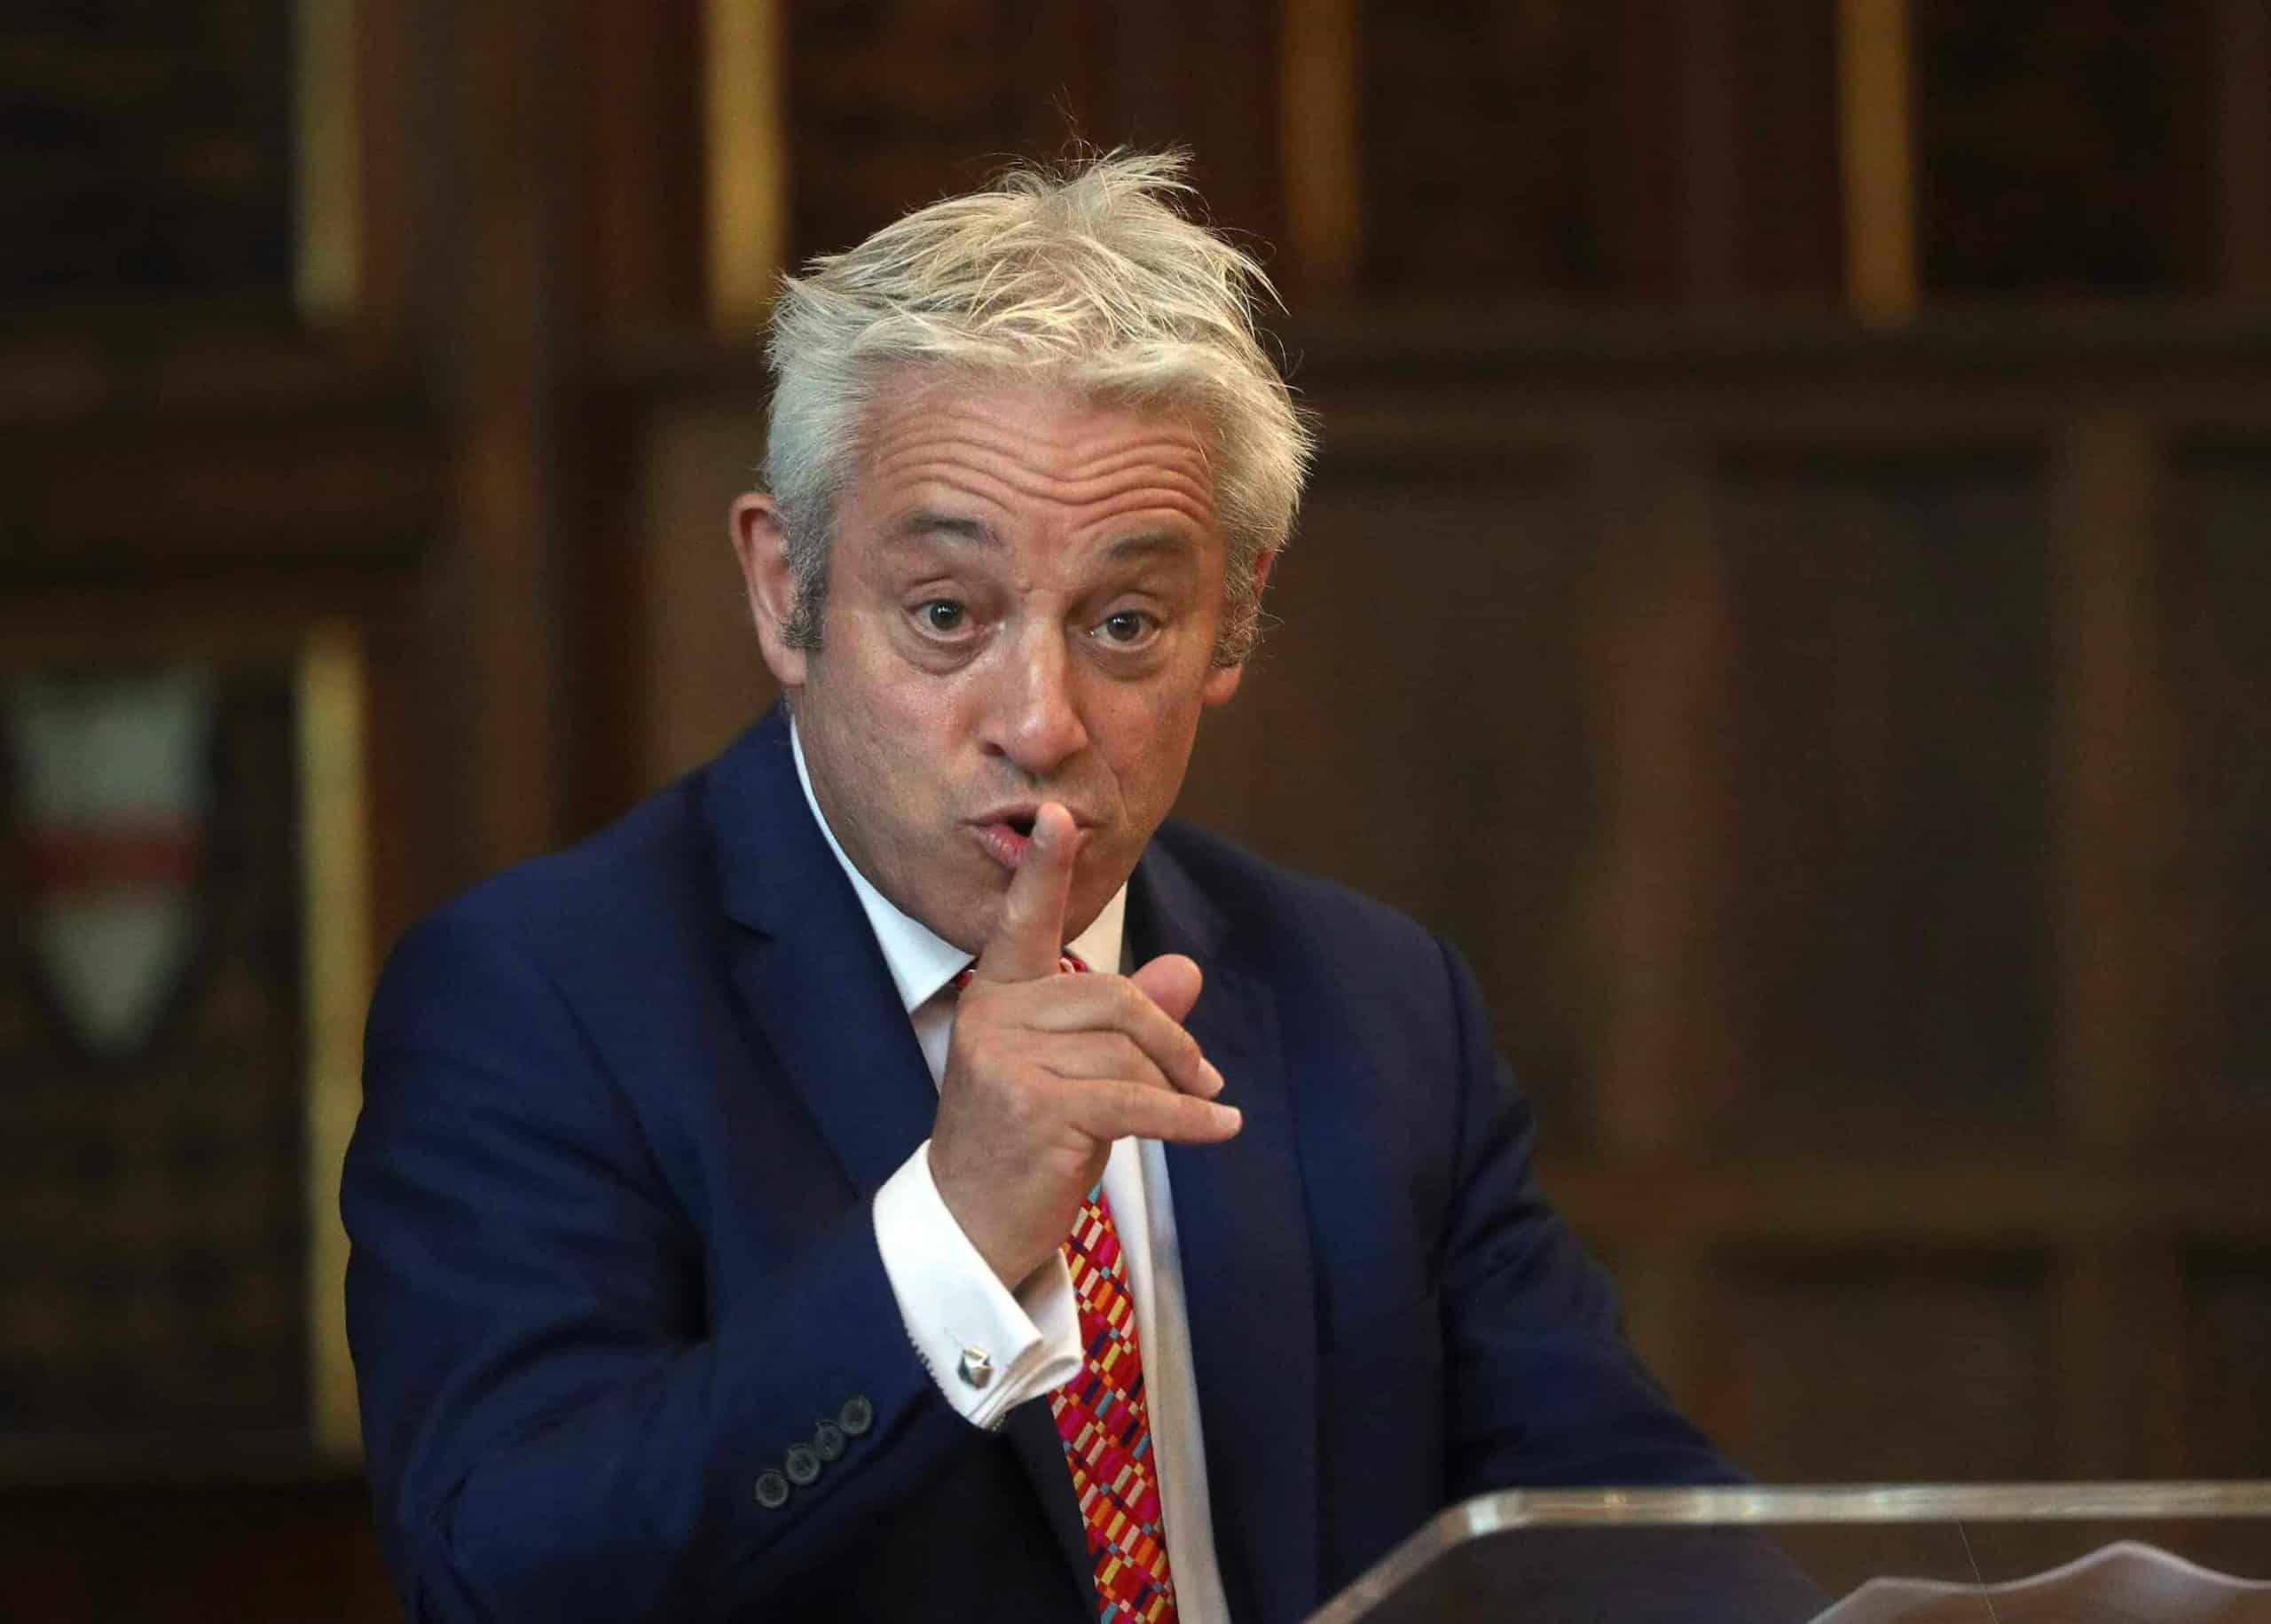 ‘Terrible example to set to the rest of society’ – Bercow warns Johnson against disobeying law over Brexit